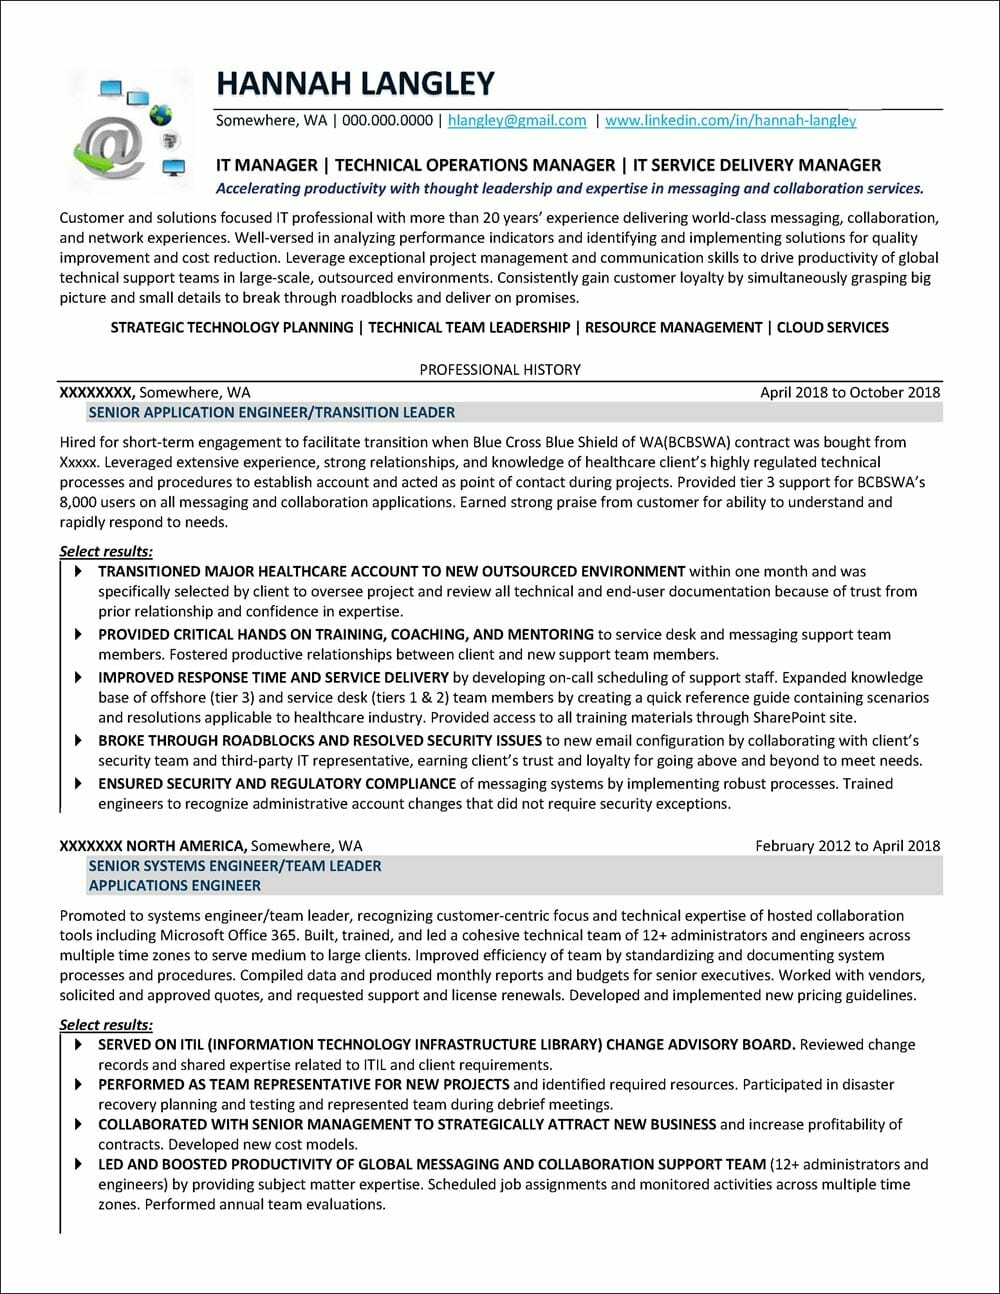 IT Manager Resume Example Distinctive Career Services